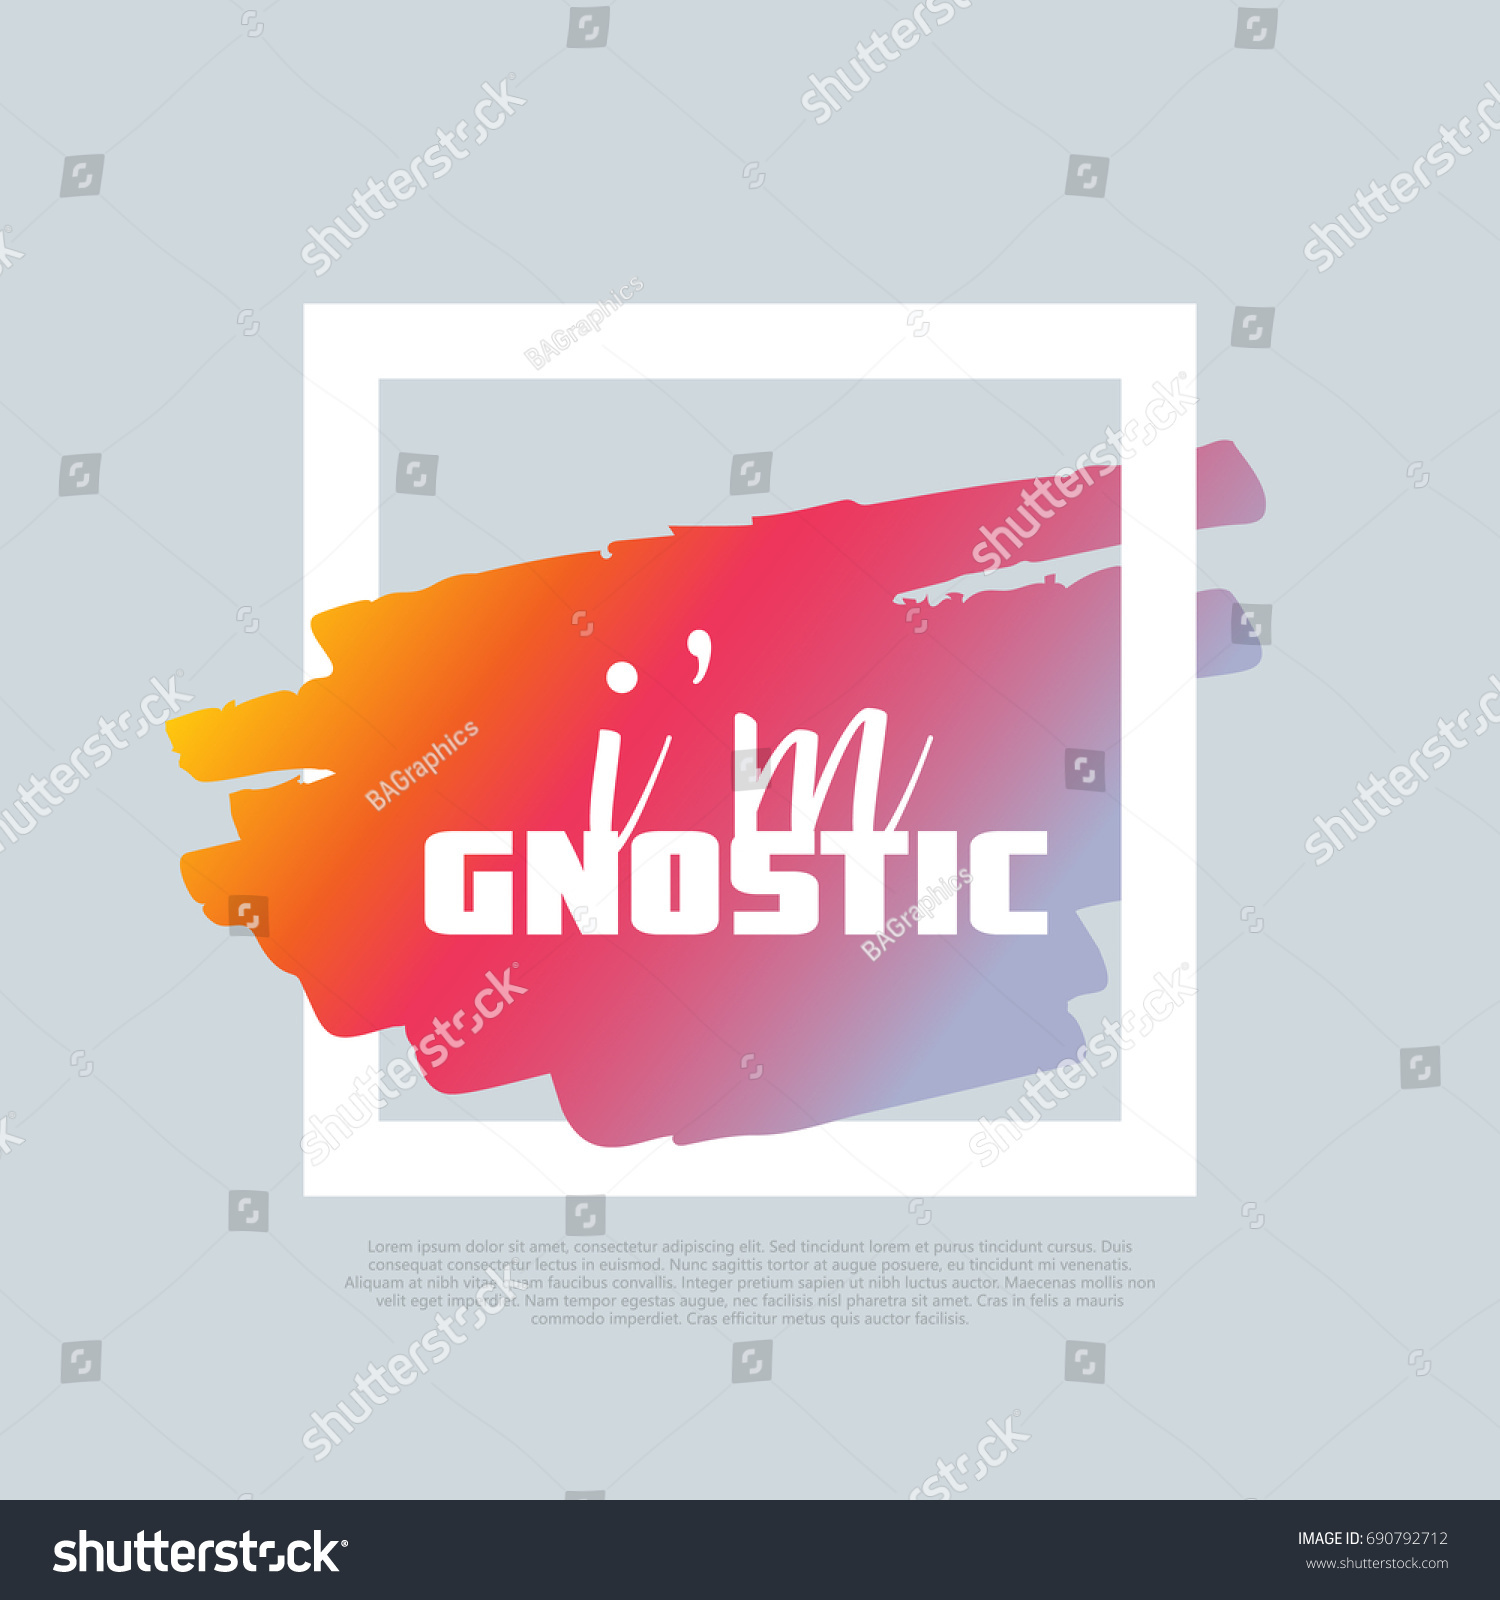 SVG of I'm a Gnostic. Vector clip-art template, poster design. Motto, label, text. Compatible wtih PNG, JPG, AI, CDR, SVG, PDF and EPS. svg